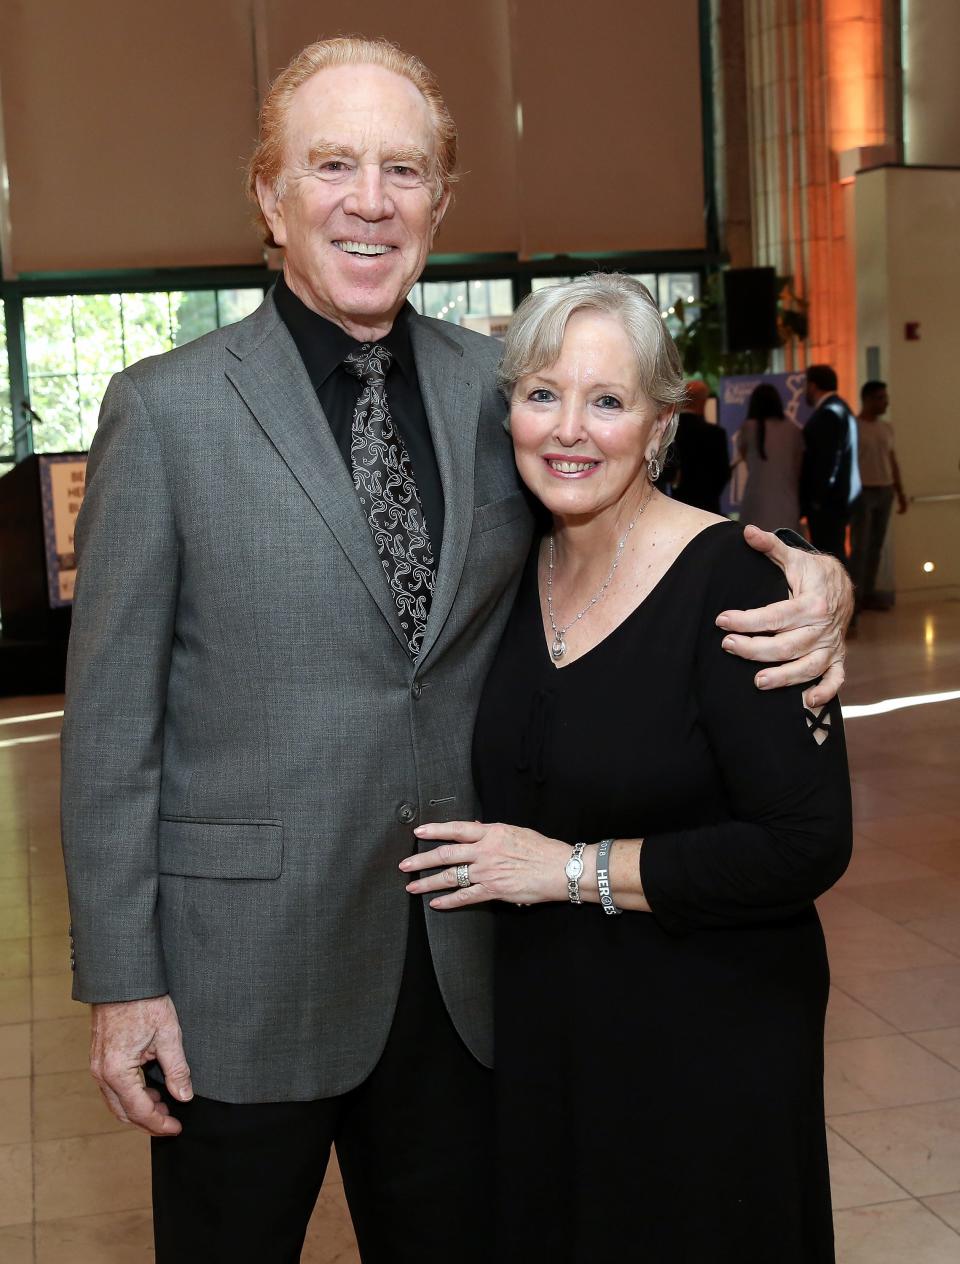 Alan Kalter and Peggy Masterson at an event on June 19, 2018 in New York City.